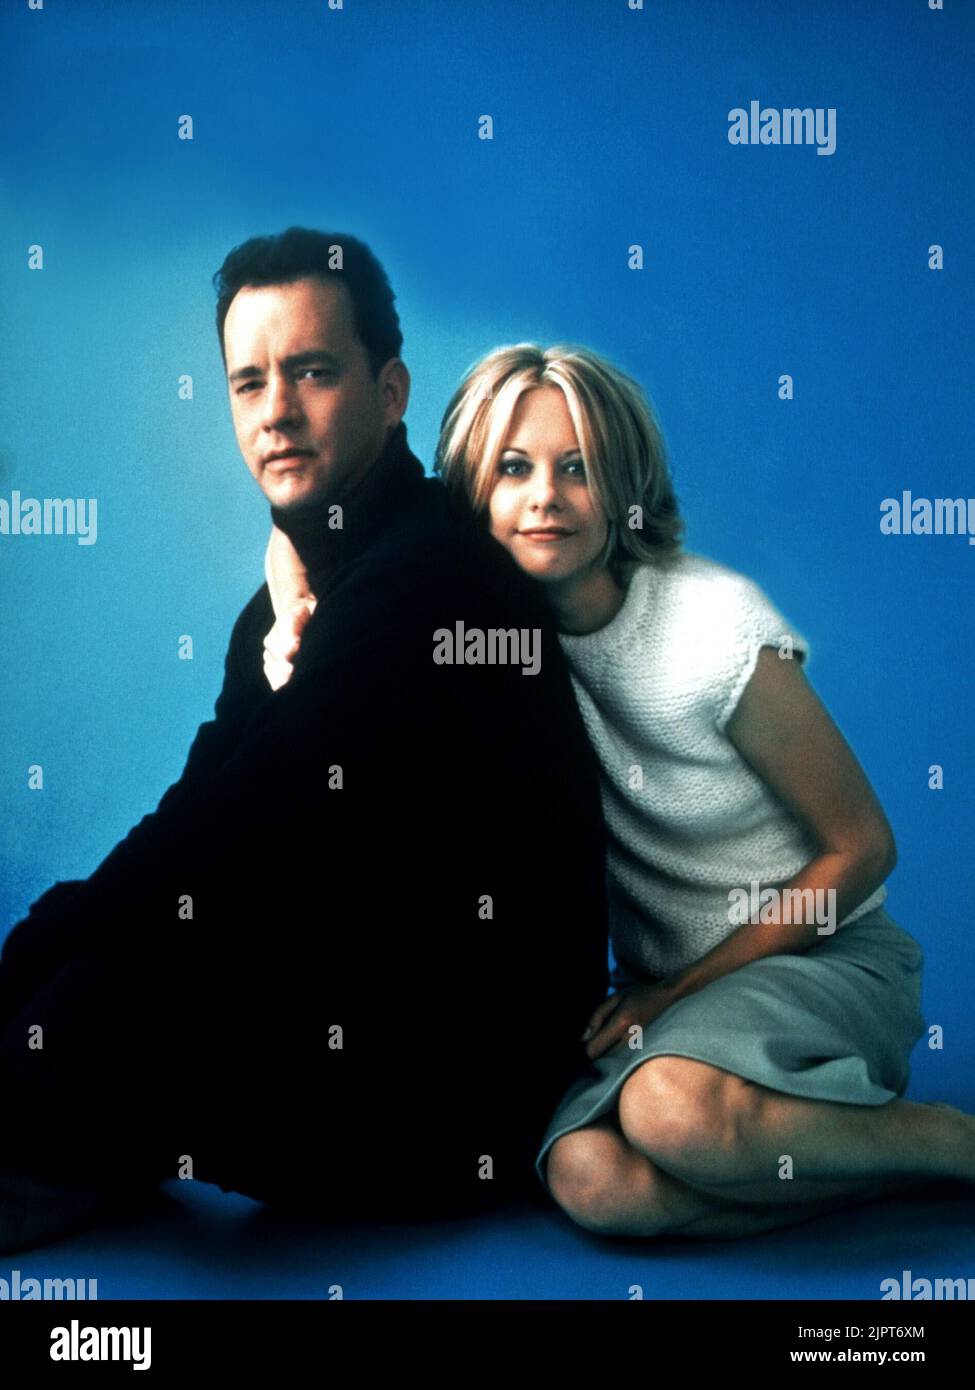 You've got mail movie hi-res stock photography and images - Alamy